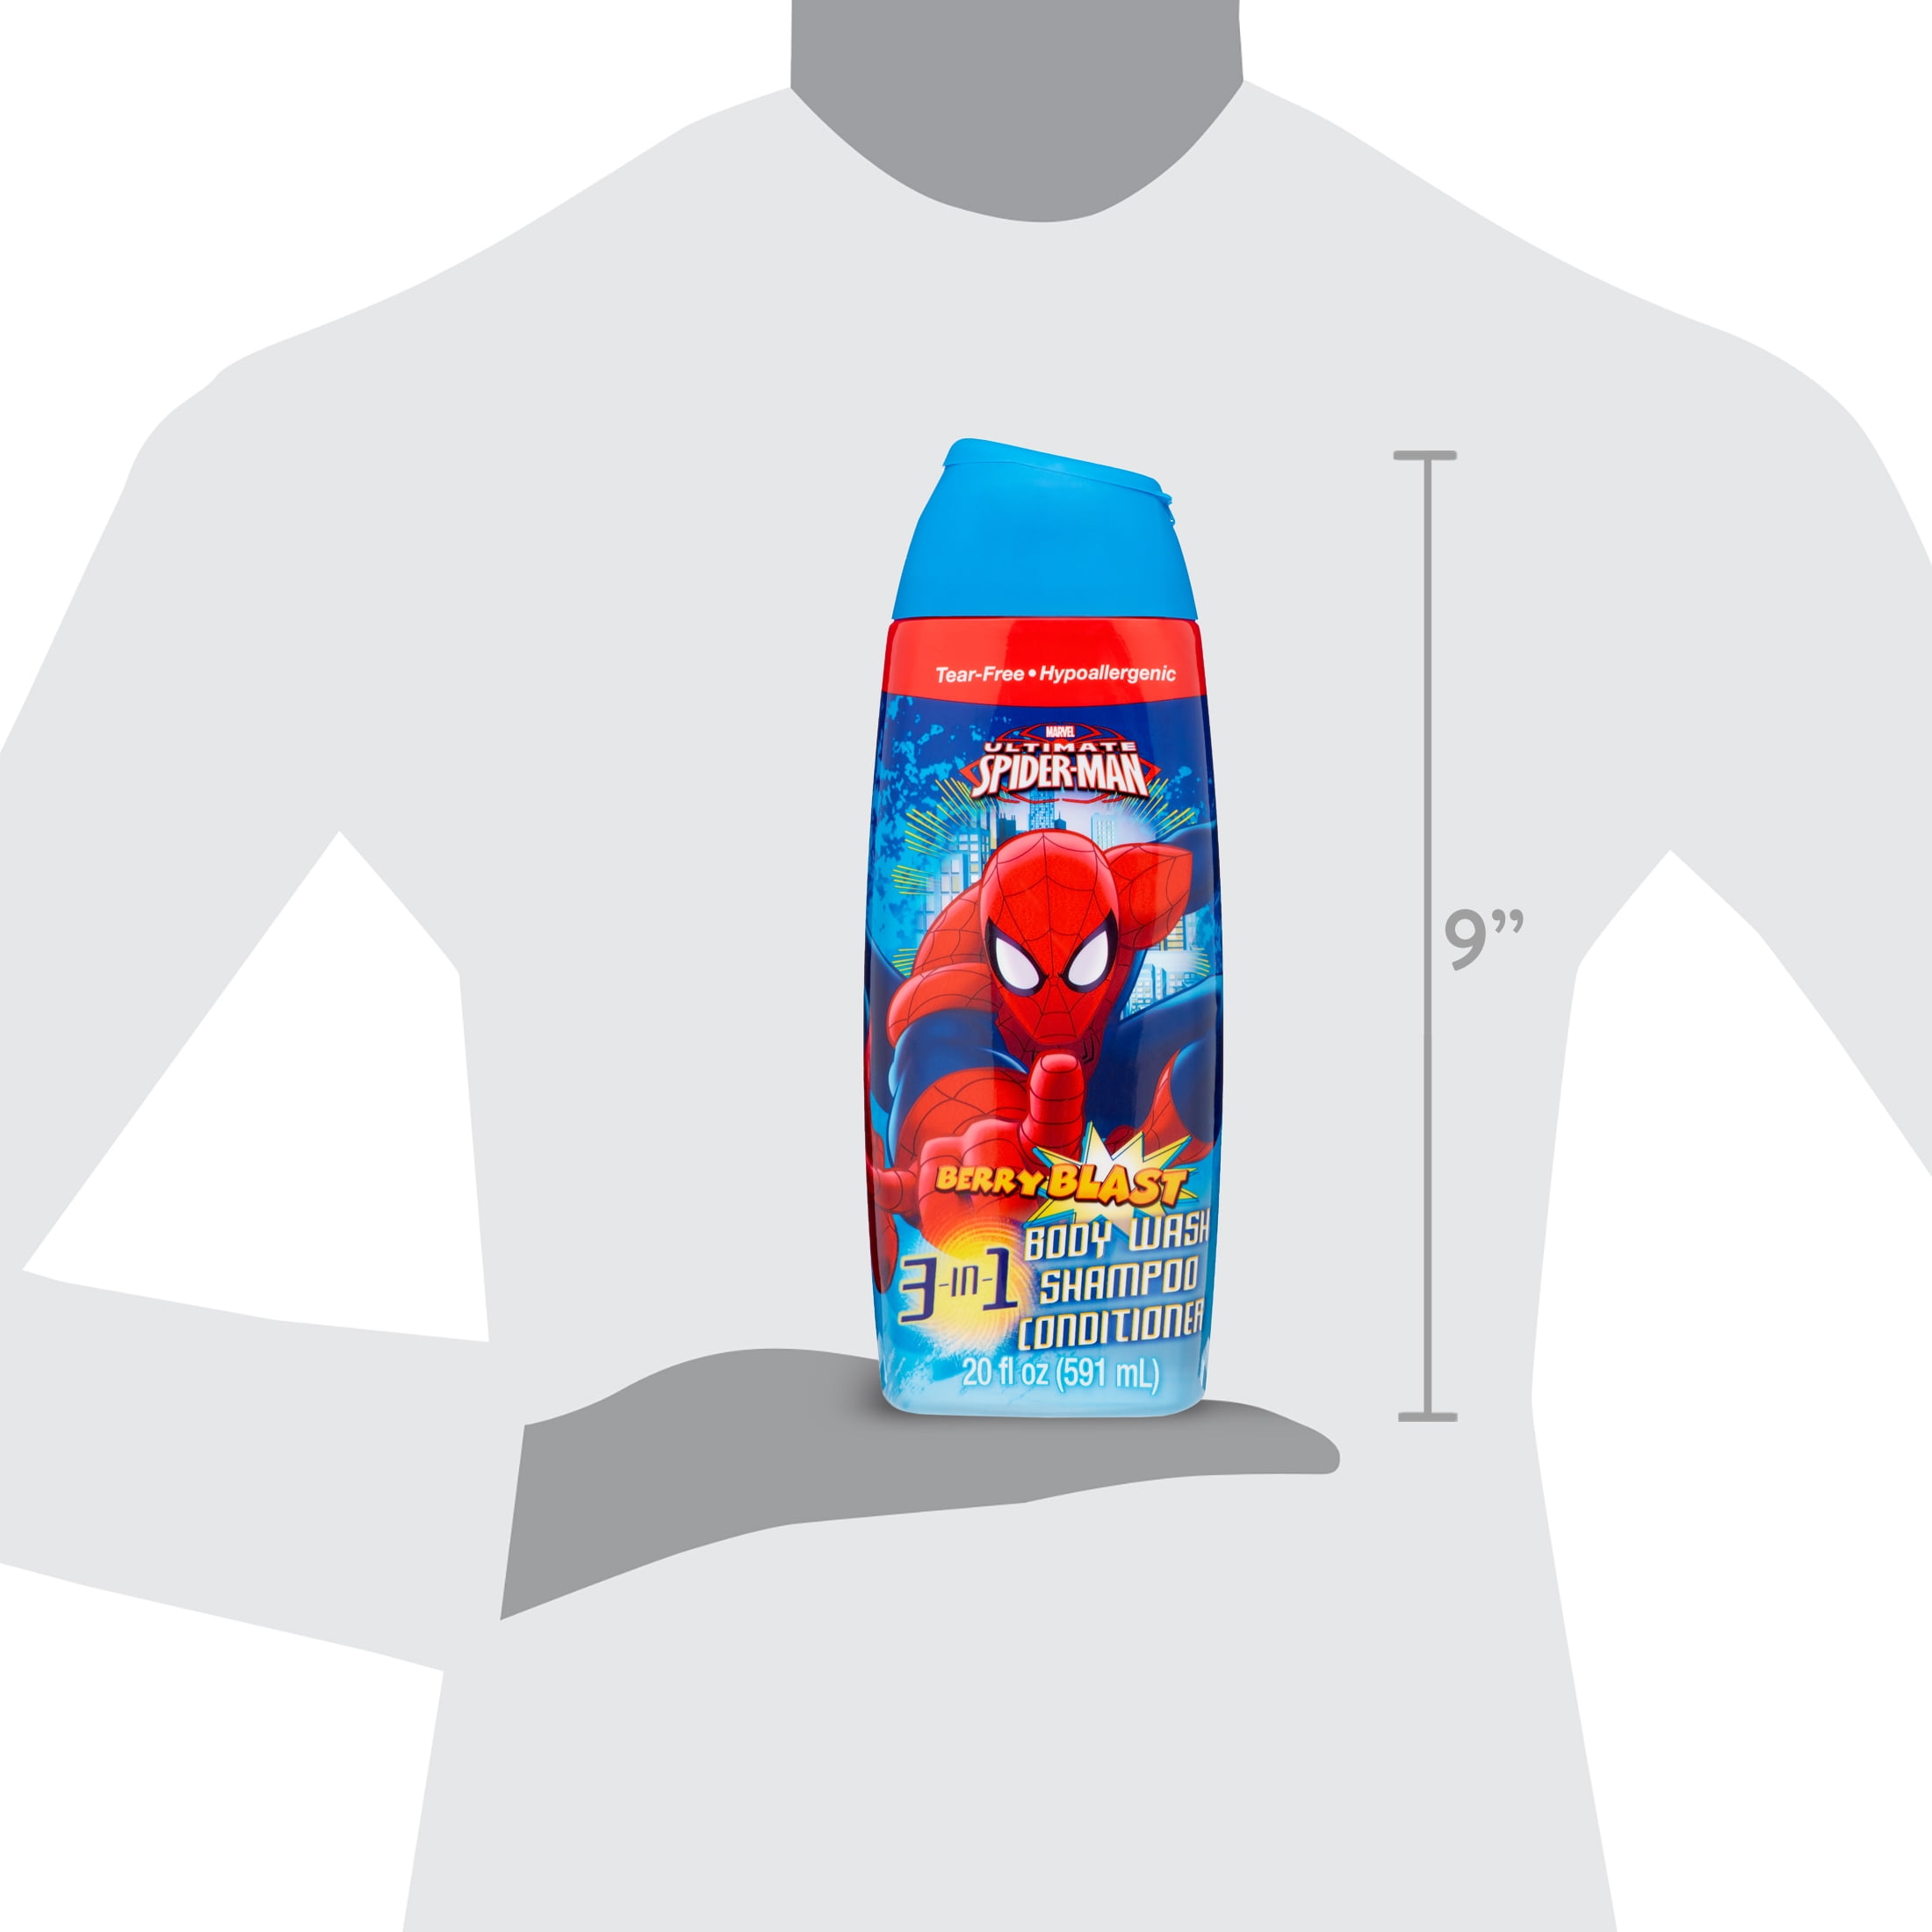 Spider-Man Berry Blast 3-in-1 Body Wash, Shampoo and Conditioner - Shop  Bath & Hair Care at H-E-B